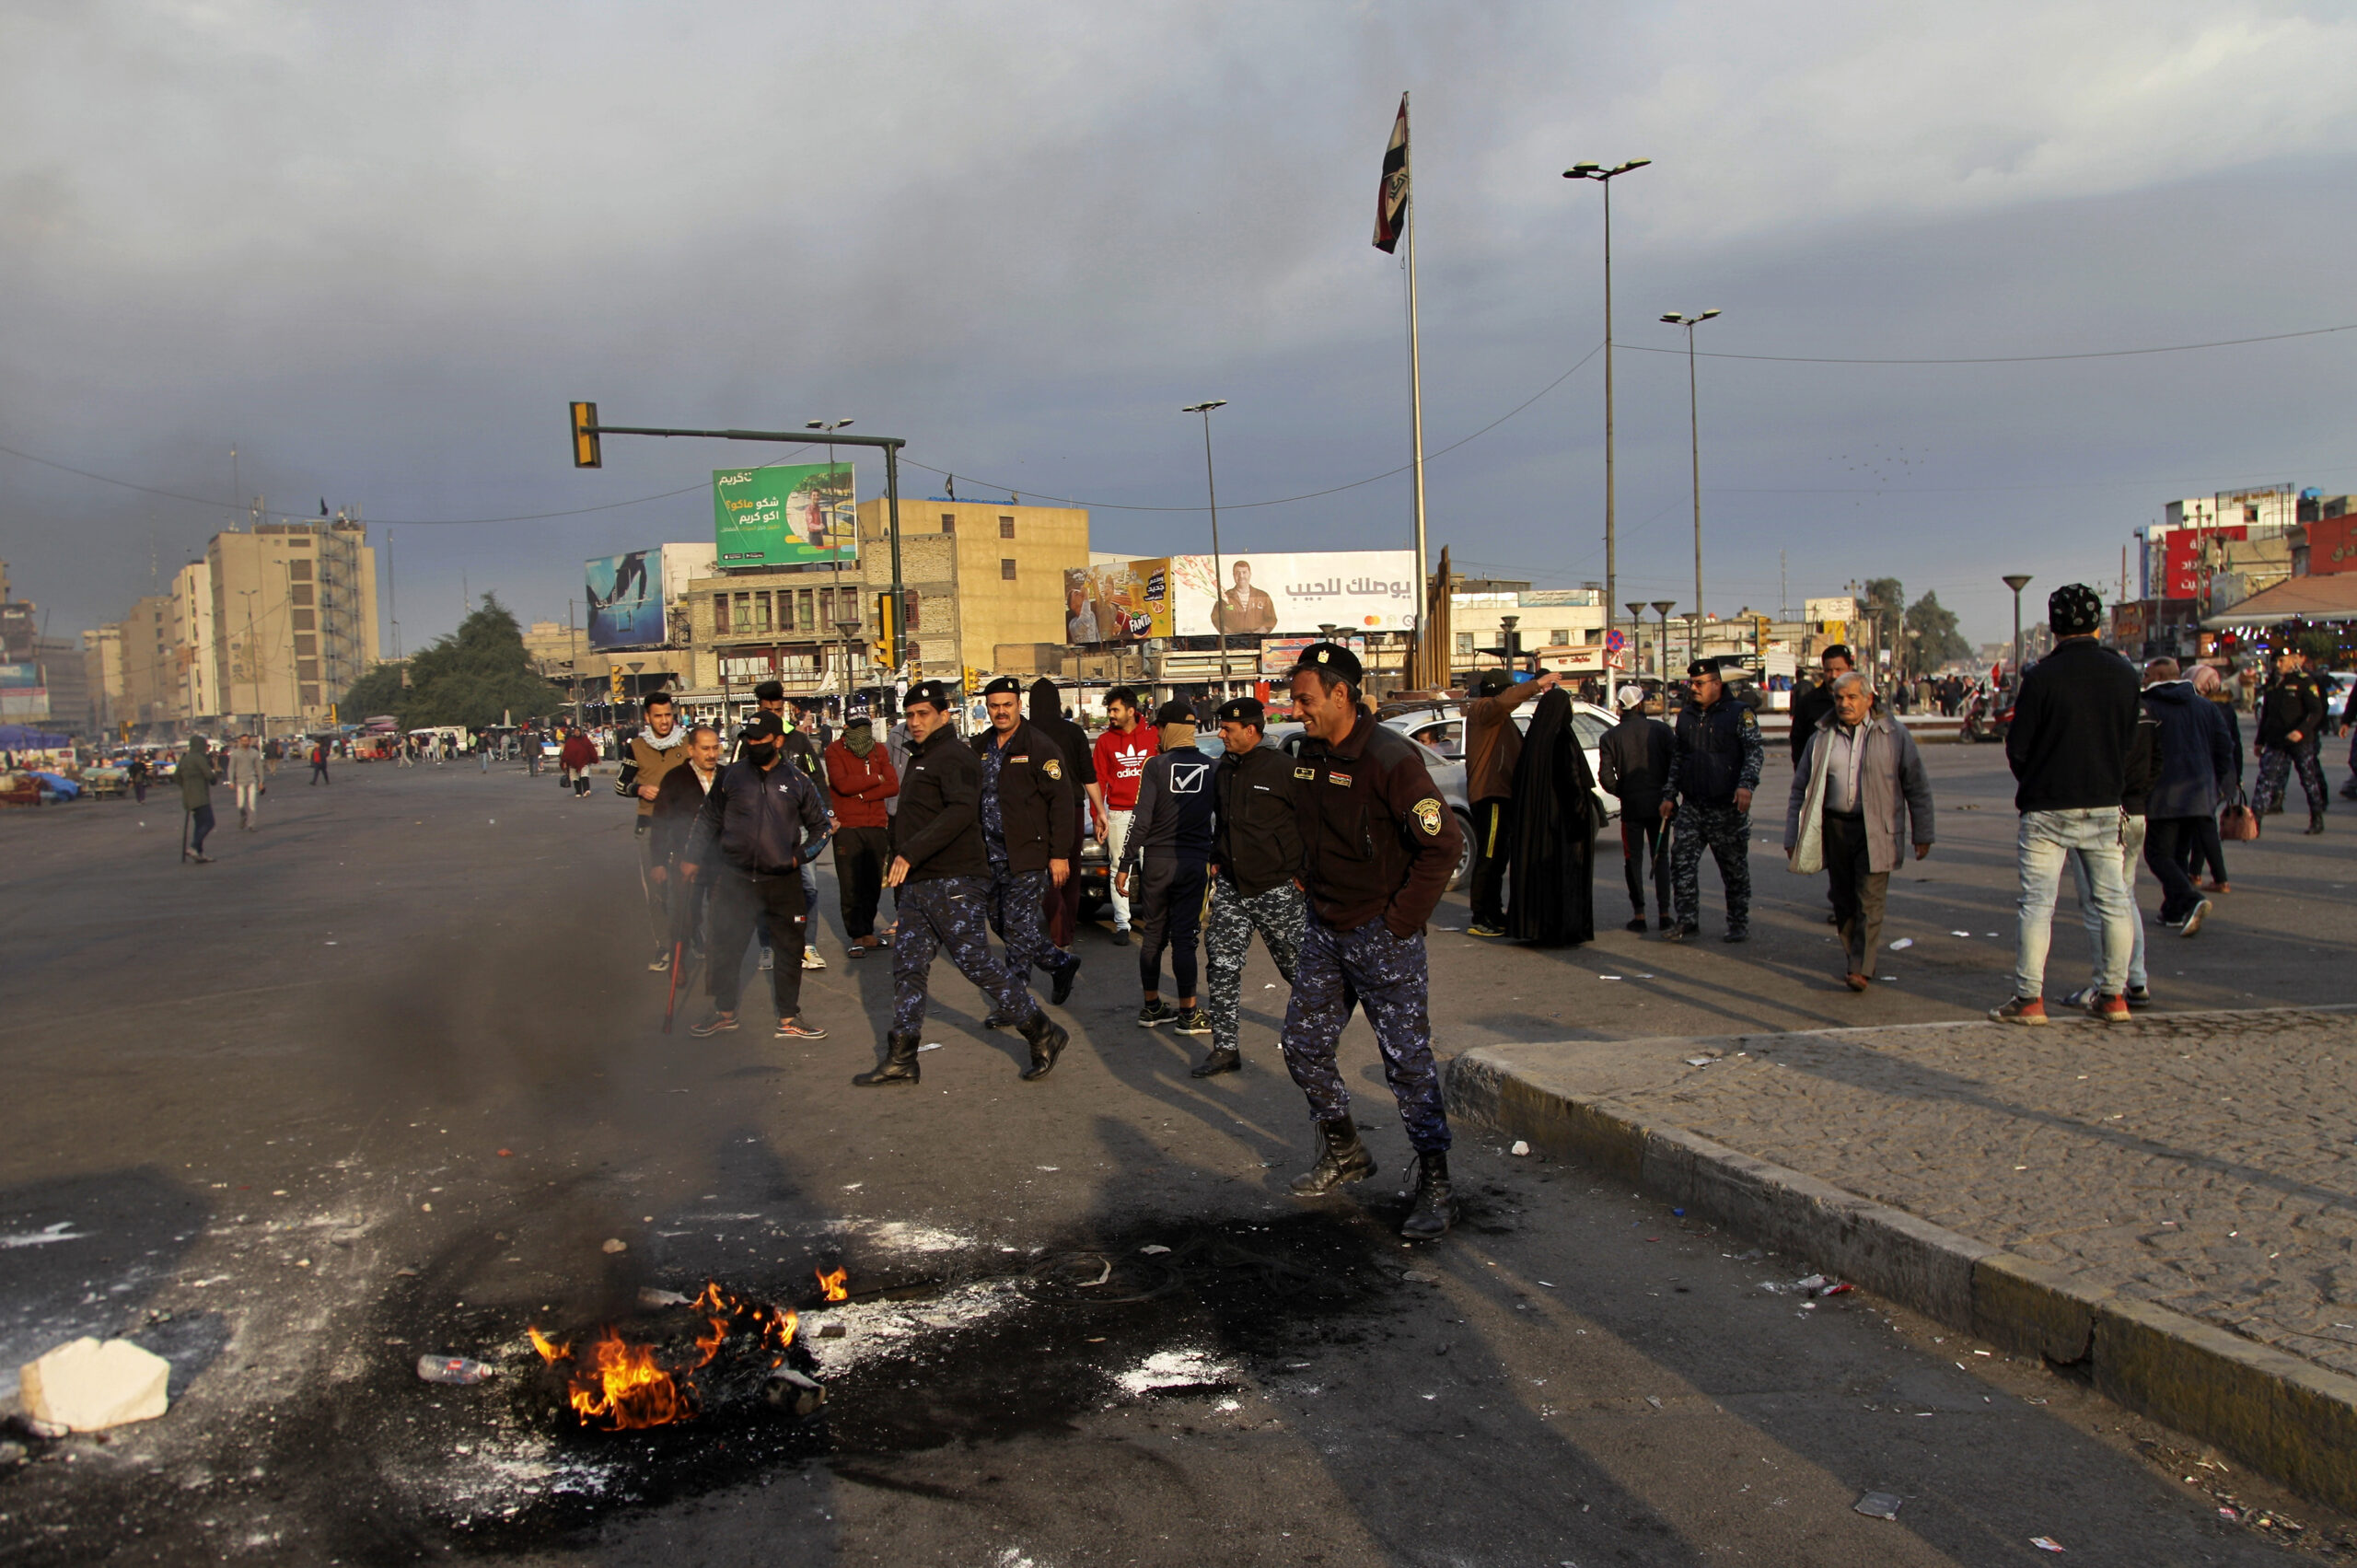 Protestors in the streets of Baghdad, Iran